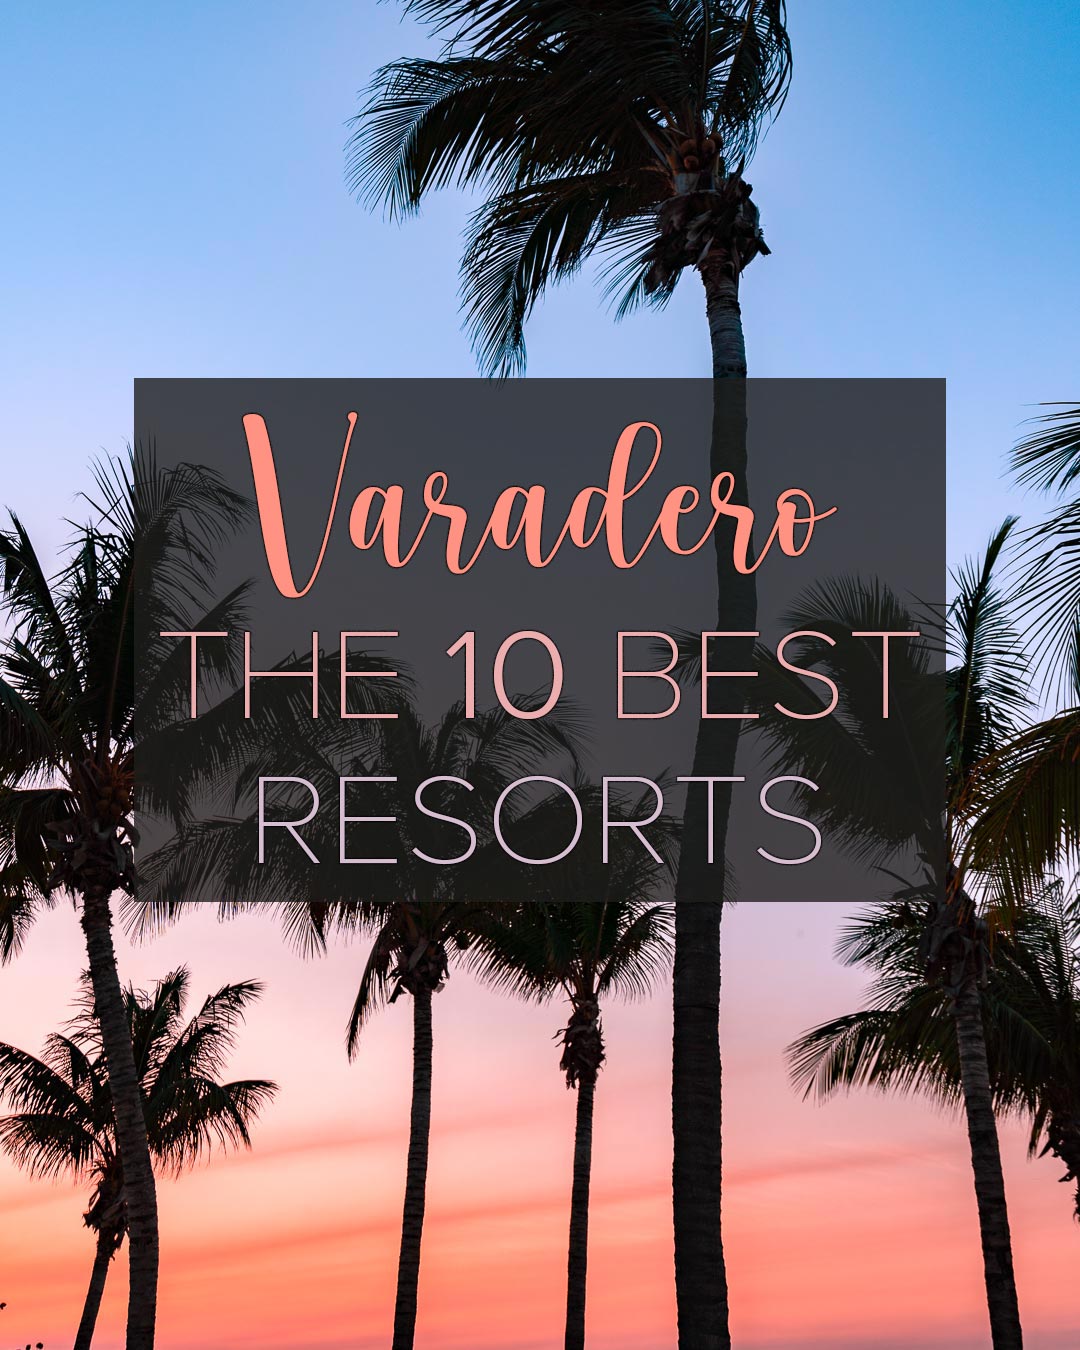 The 10 best varadero all-inclusive resorts